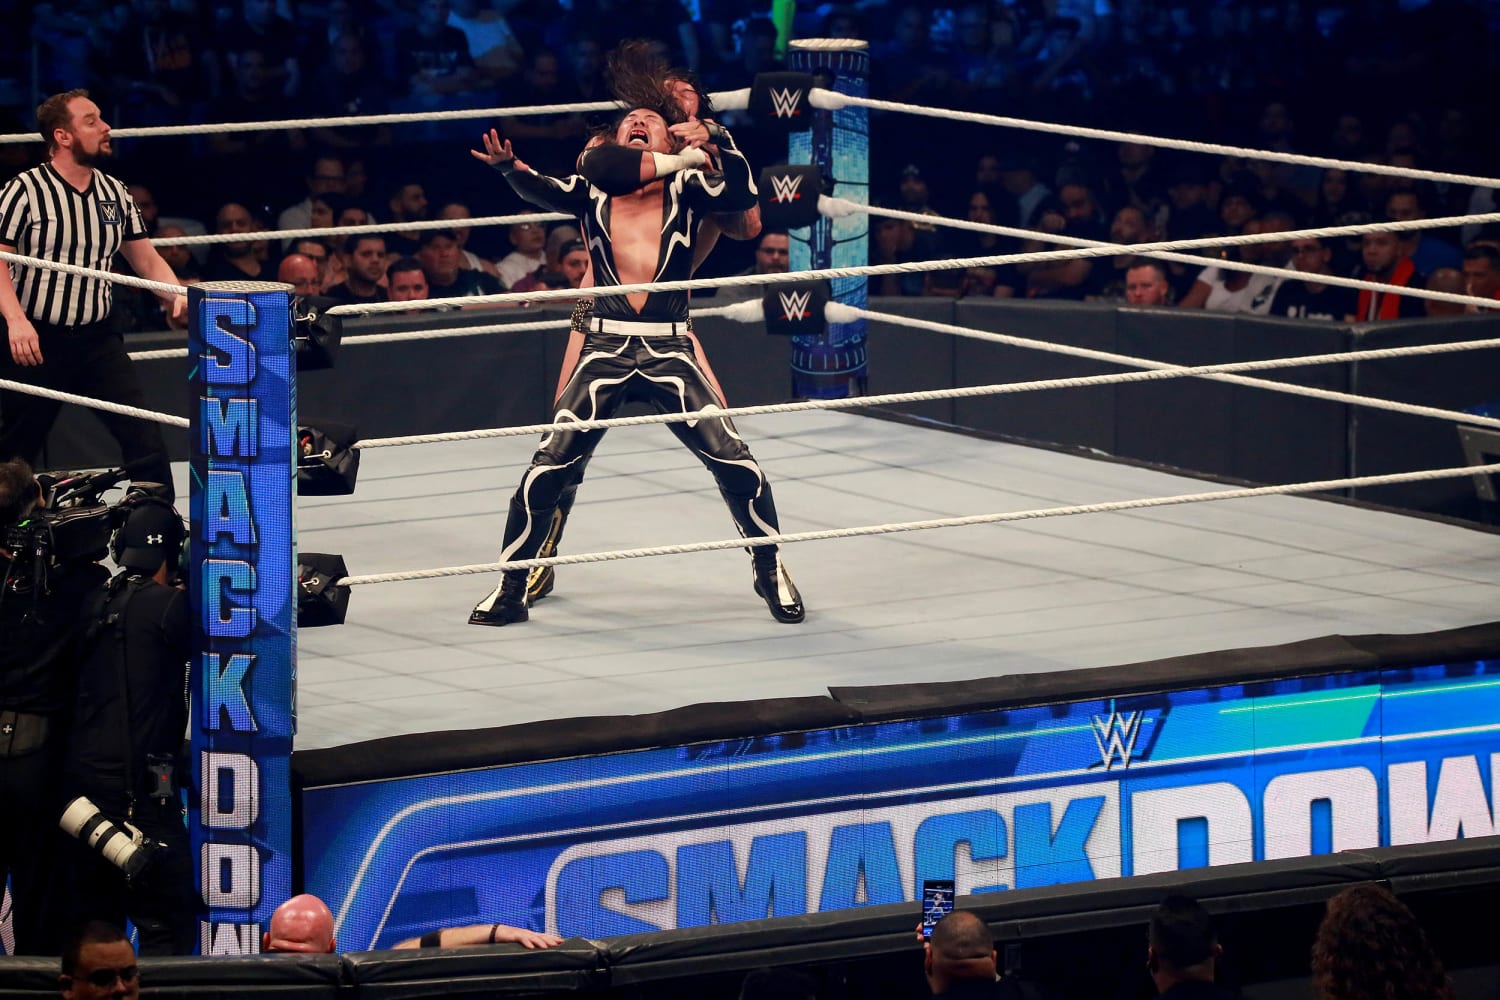 WWEs Smackdown Moving to USA Network